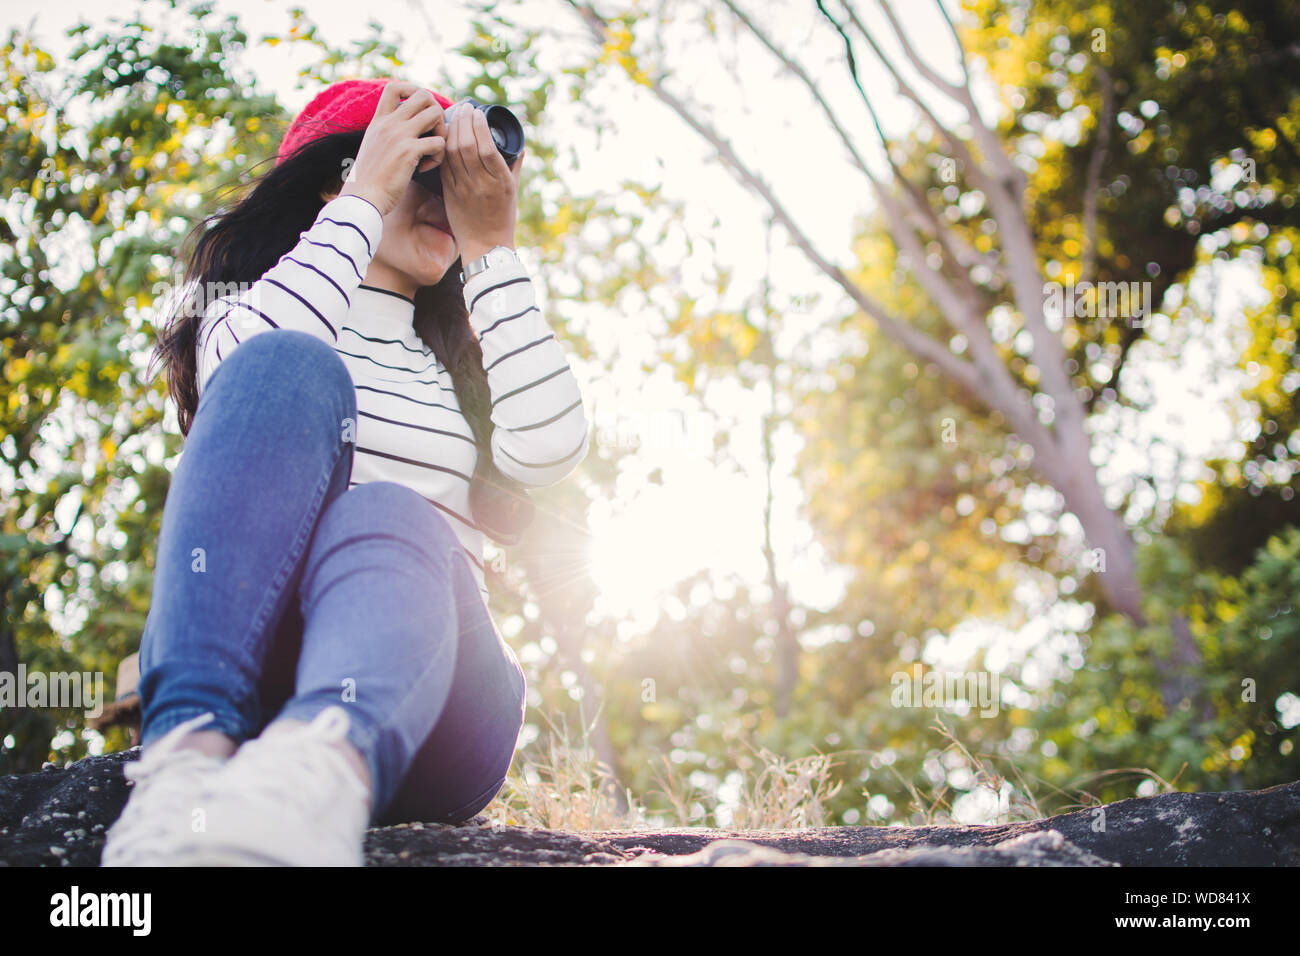 Woman Photographing While Sitting On Rock Against Trees Stock Photo